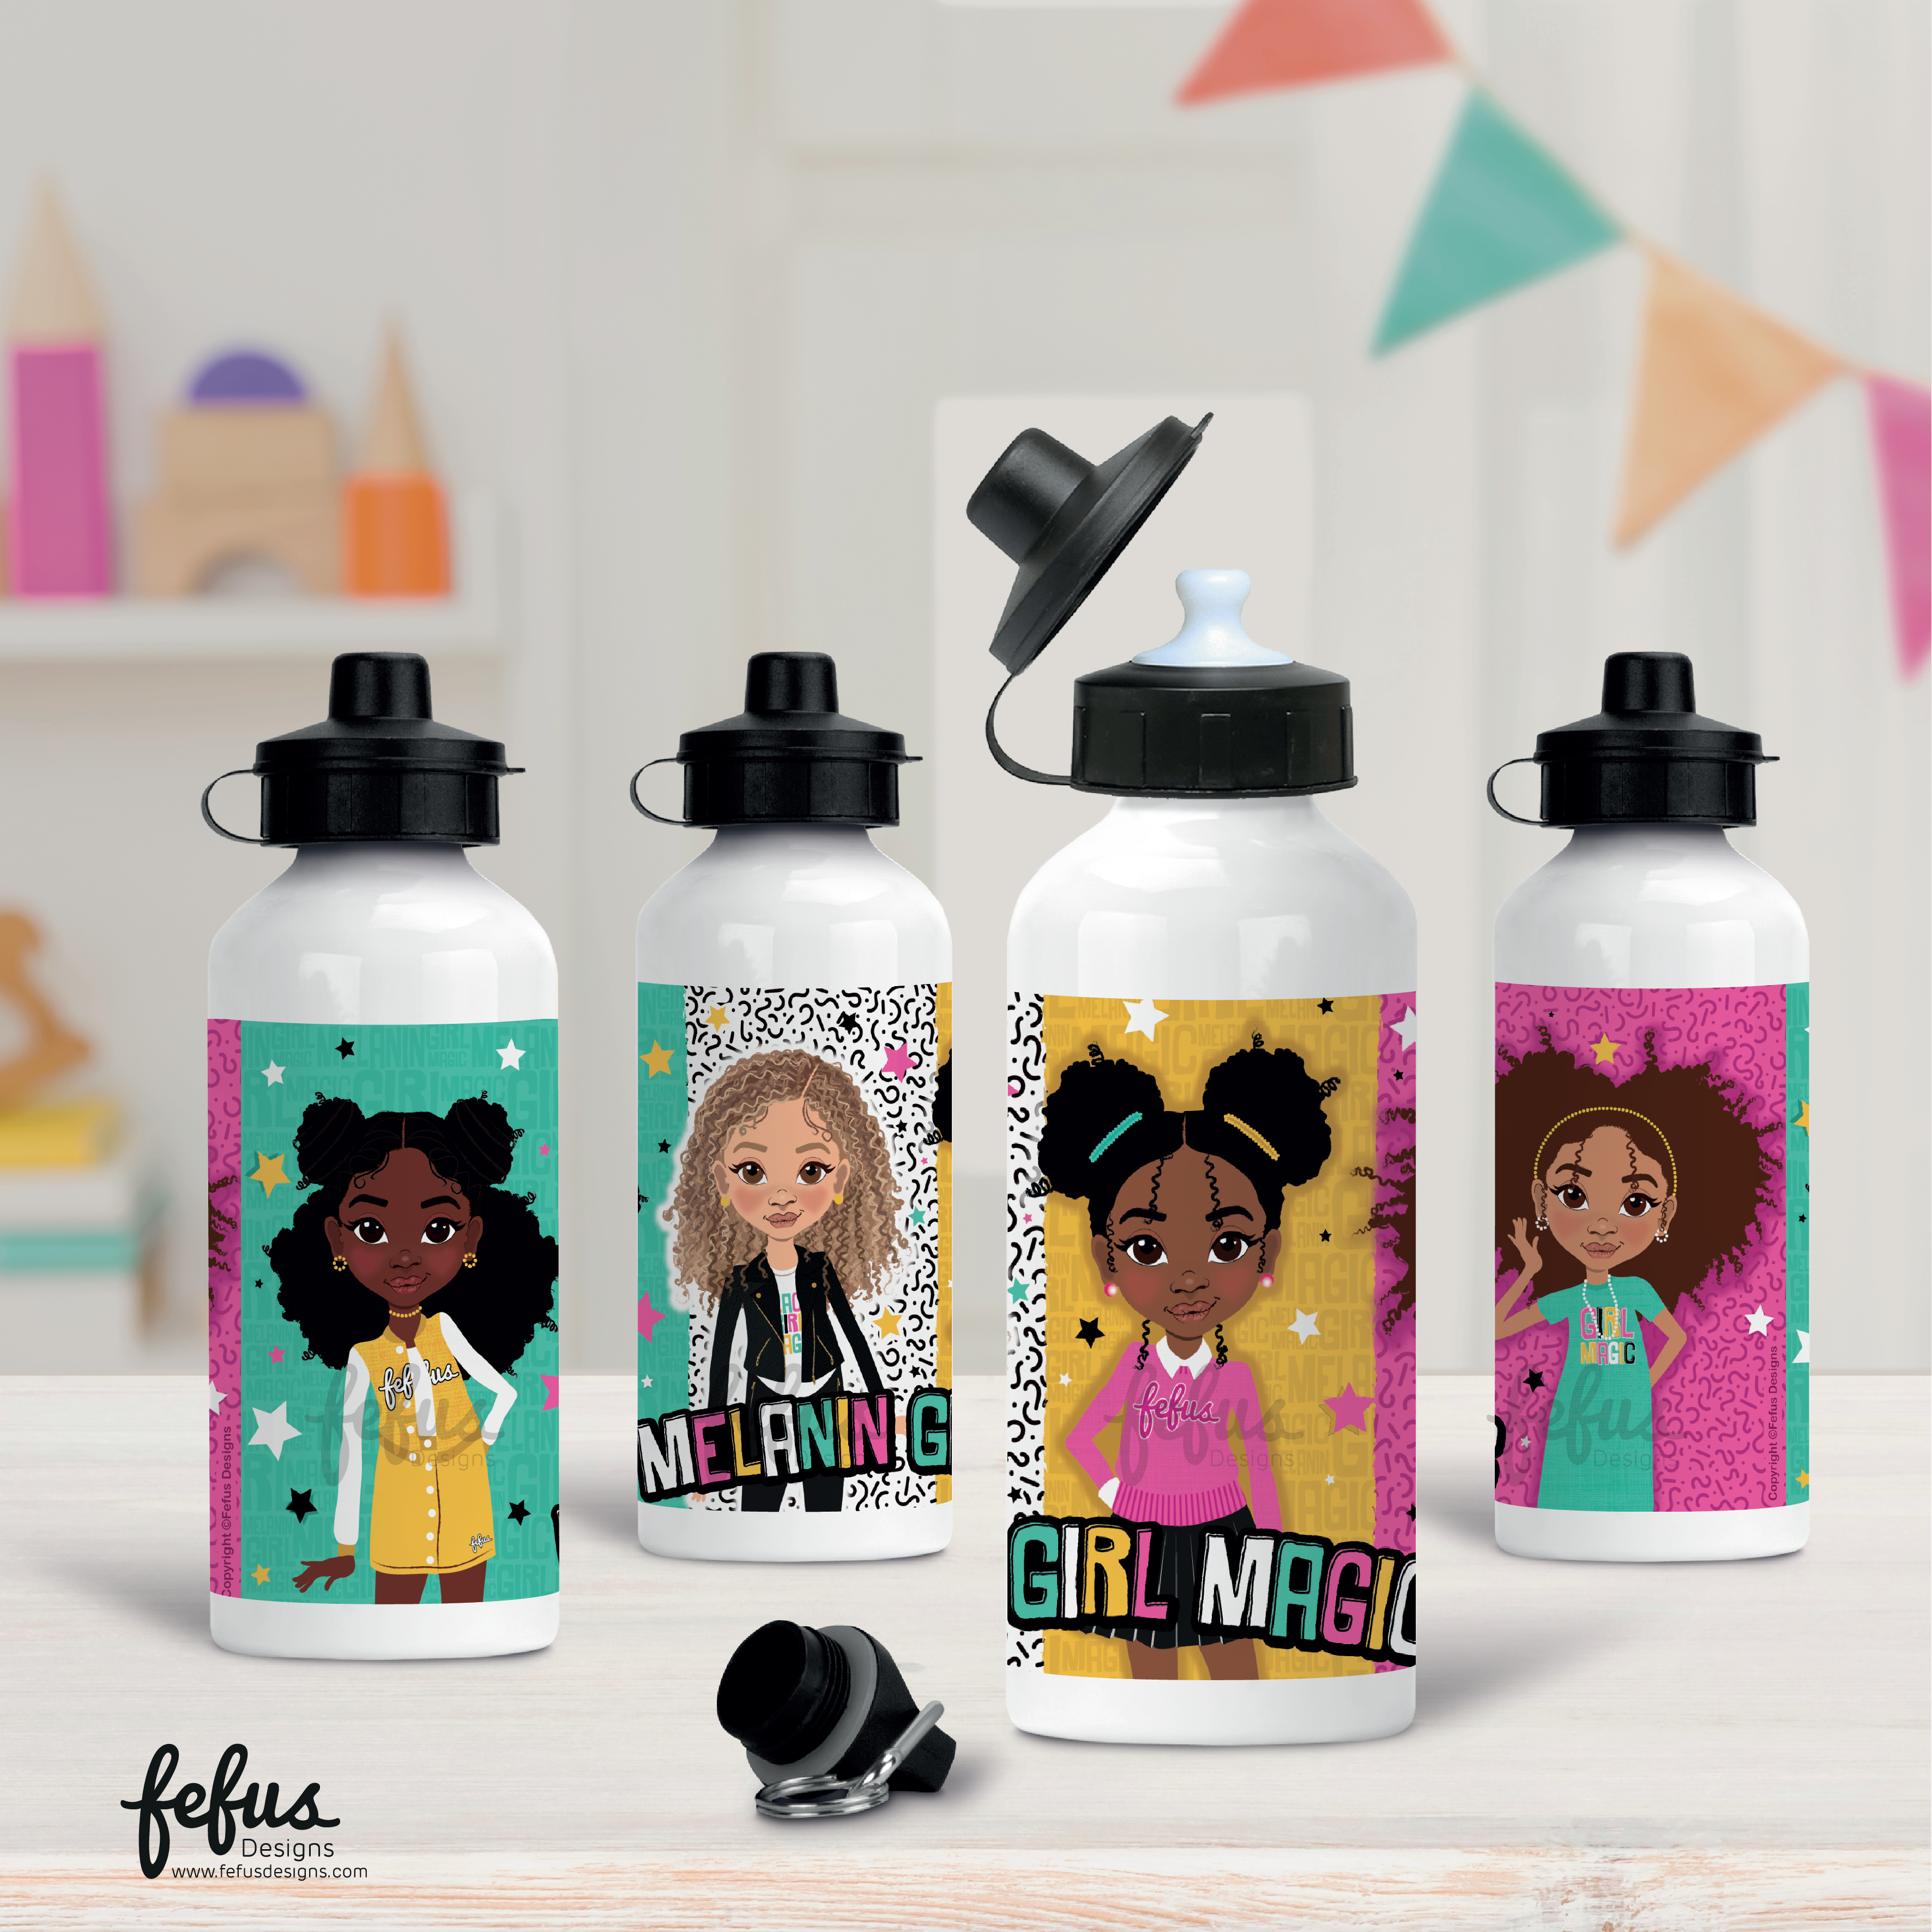 A striking Melanin Girl Magic Aluminium Water Bottle by Fefus Designs. This lightweight and durable water bottle empowers young queens, featuring a design with four brown beauties and the phrase 'Melanin Girl Magic'. With a 500ml capacity, it ensures hydration throughout the day, while the aluminium construction keeps drinks cool. Perfect for school, sports, and outdoor adventures. Surprise a special young queen with this empowering gift, celebrating her uniqueness and magical impact on the world.